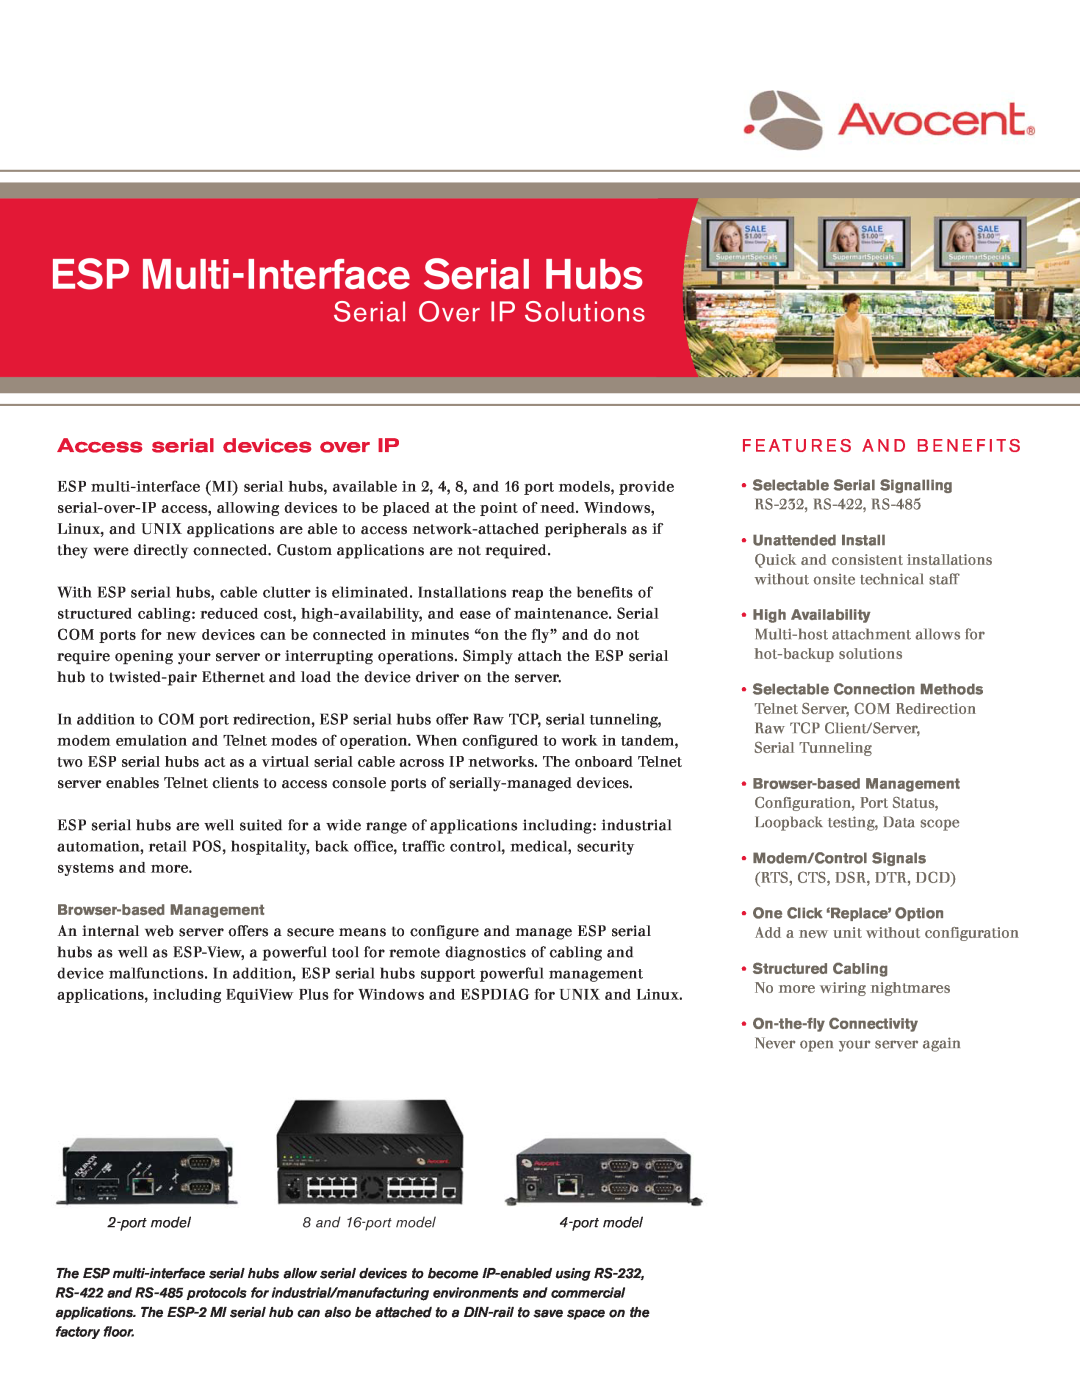 Avocent manual ESP Multi-Interface Serial Hubs, Serial Over IP Solutions, Access serial devices over IP 